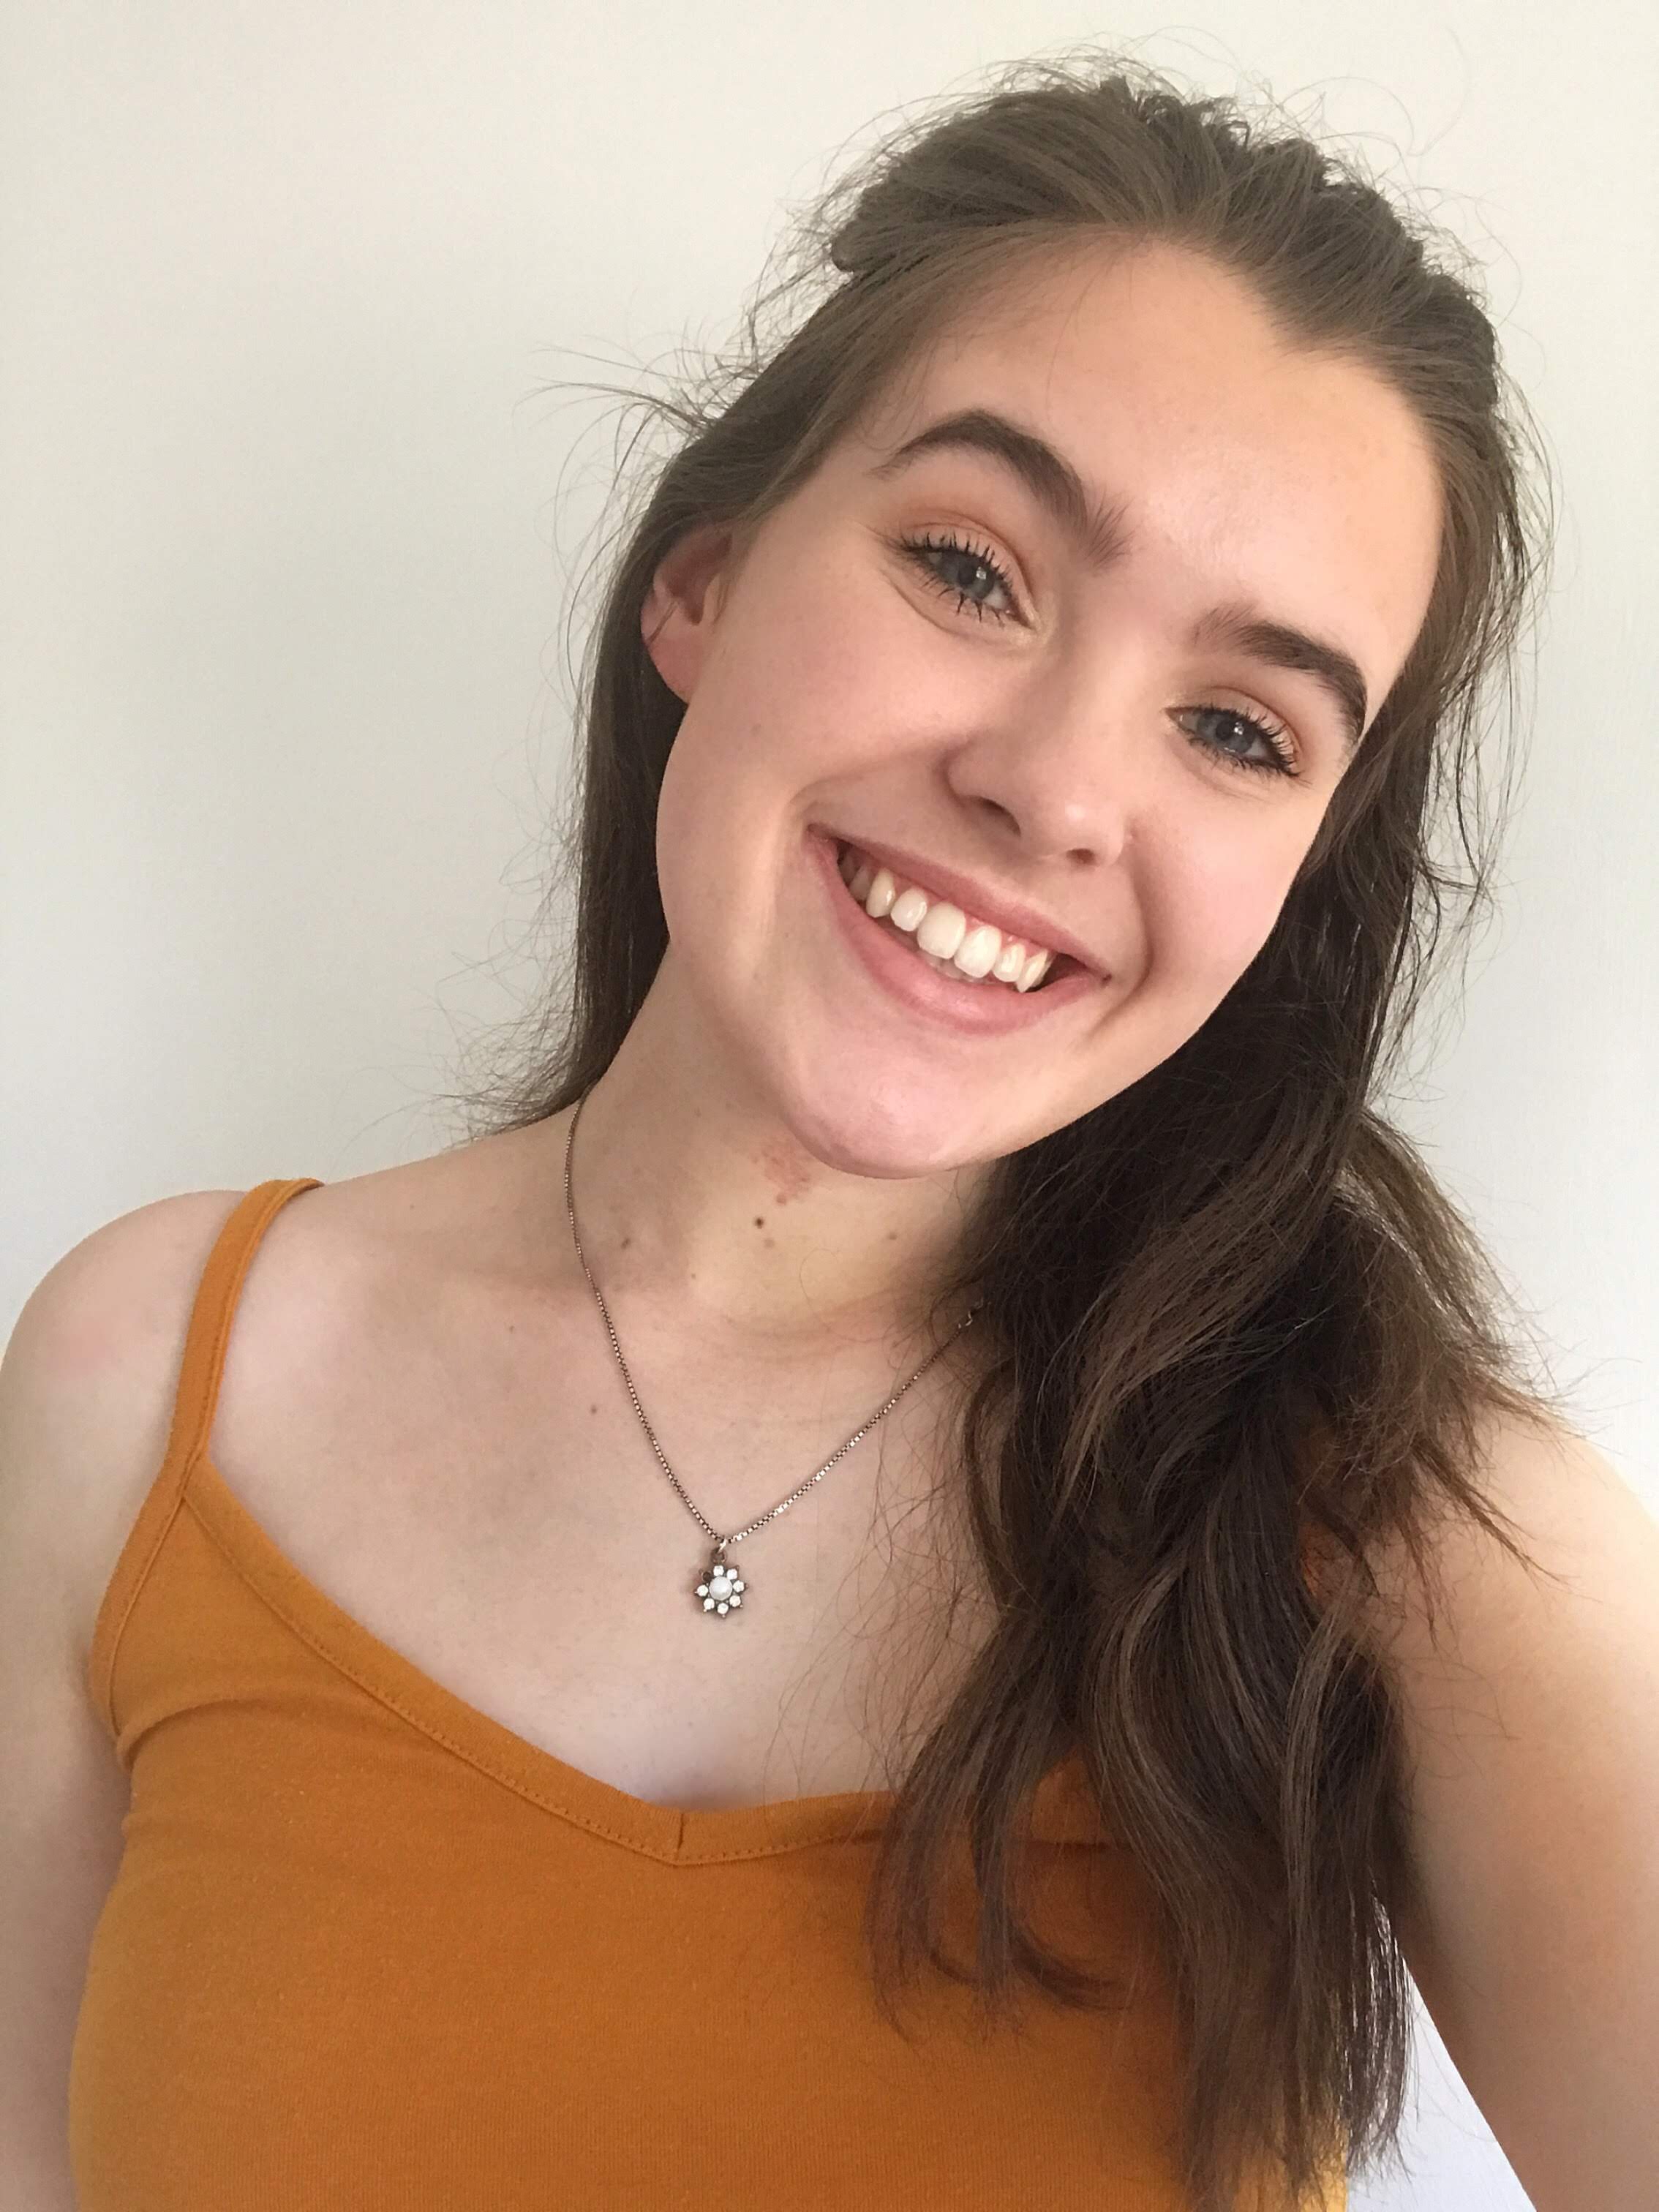 Image of the author - Cerys - smiling. She has long brown hair and is wearing an orange top.